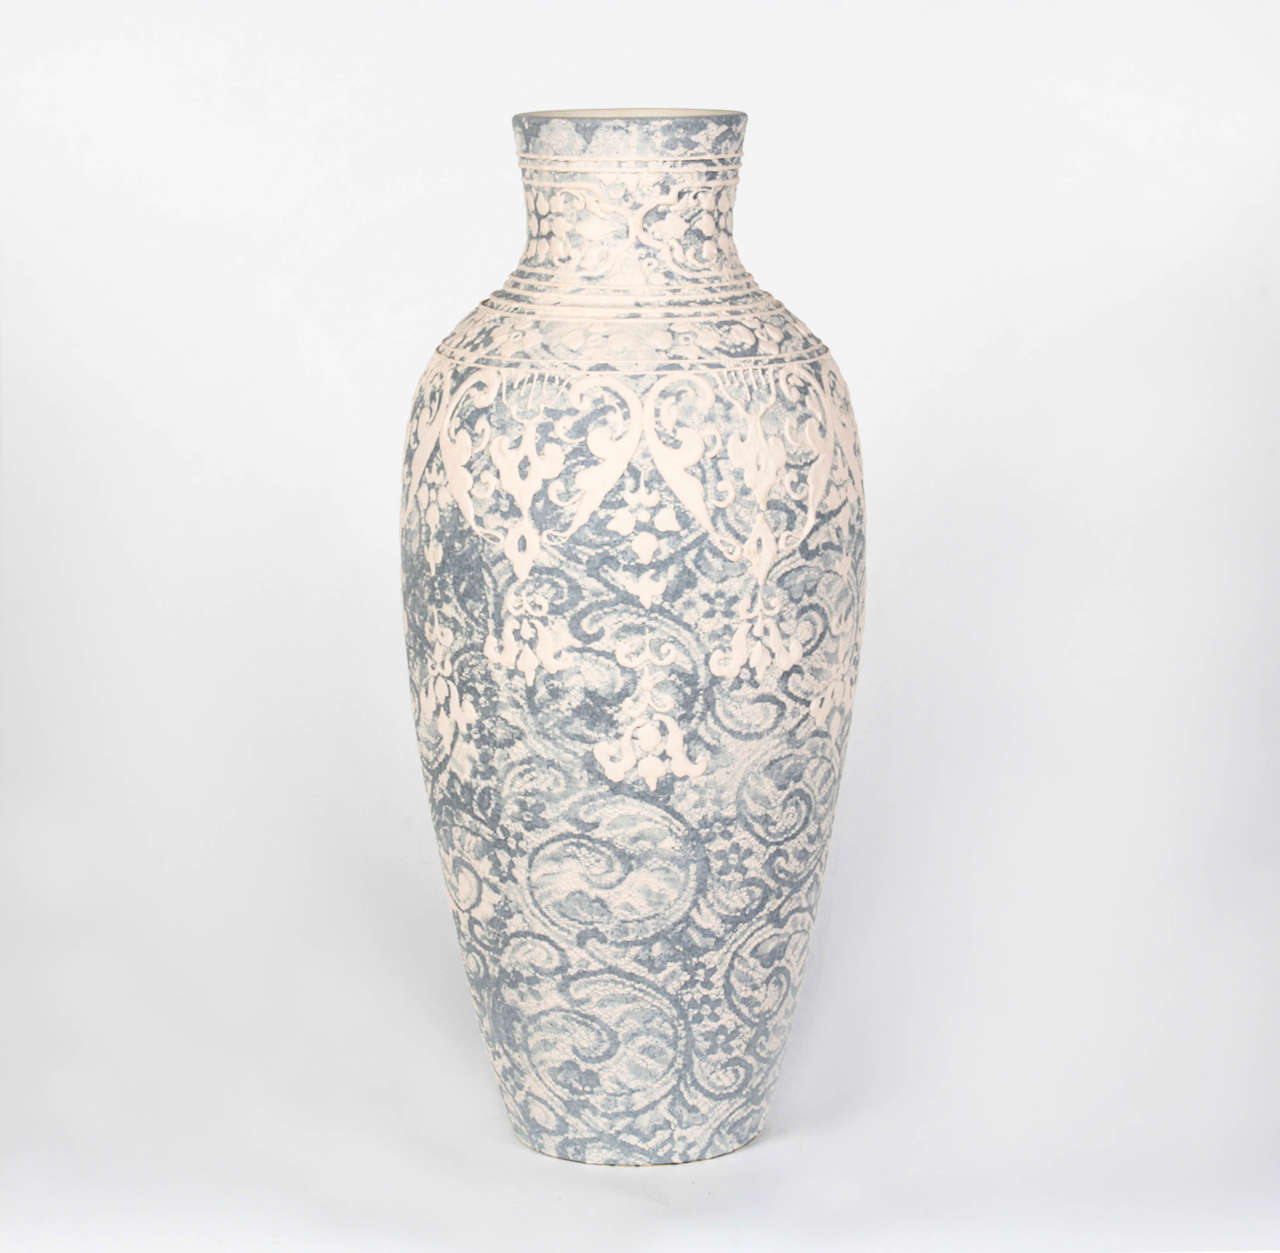 Ornate blue and white Thai ceramic vase. Curated and personally selected by Donna Karan for her Urban Zen brand.